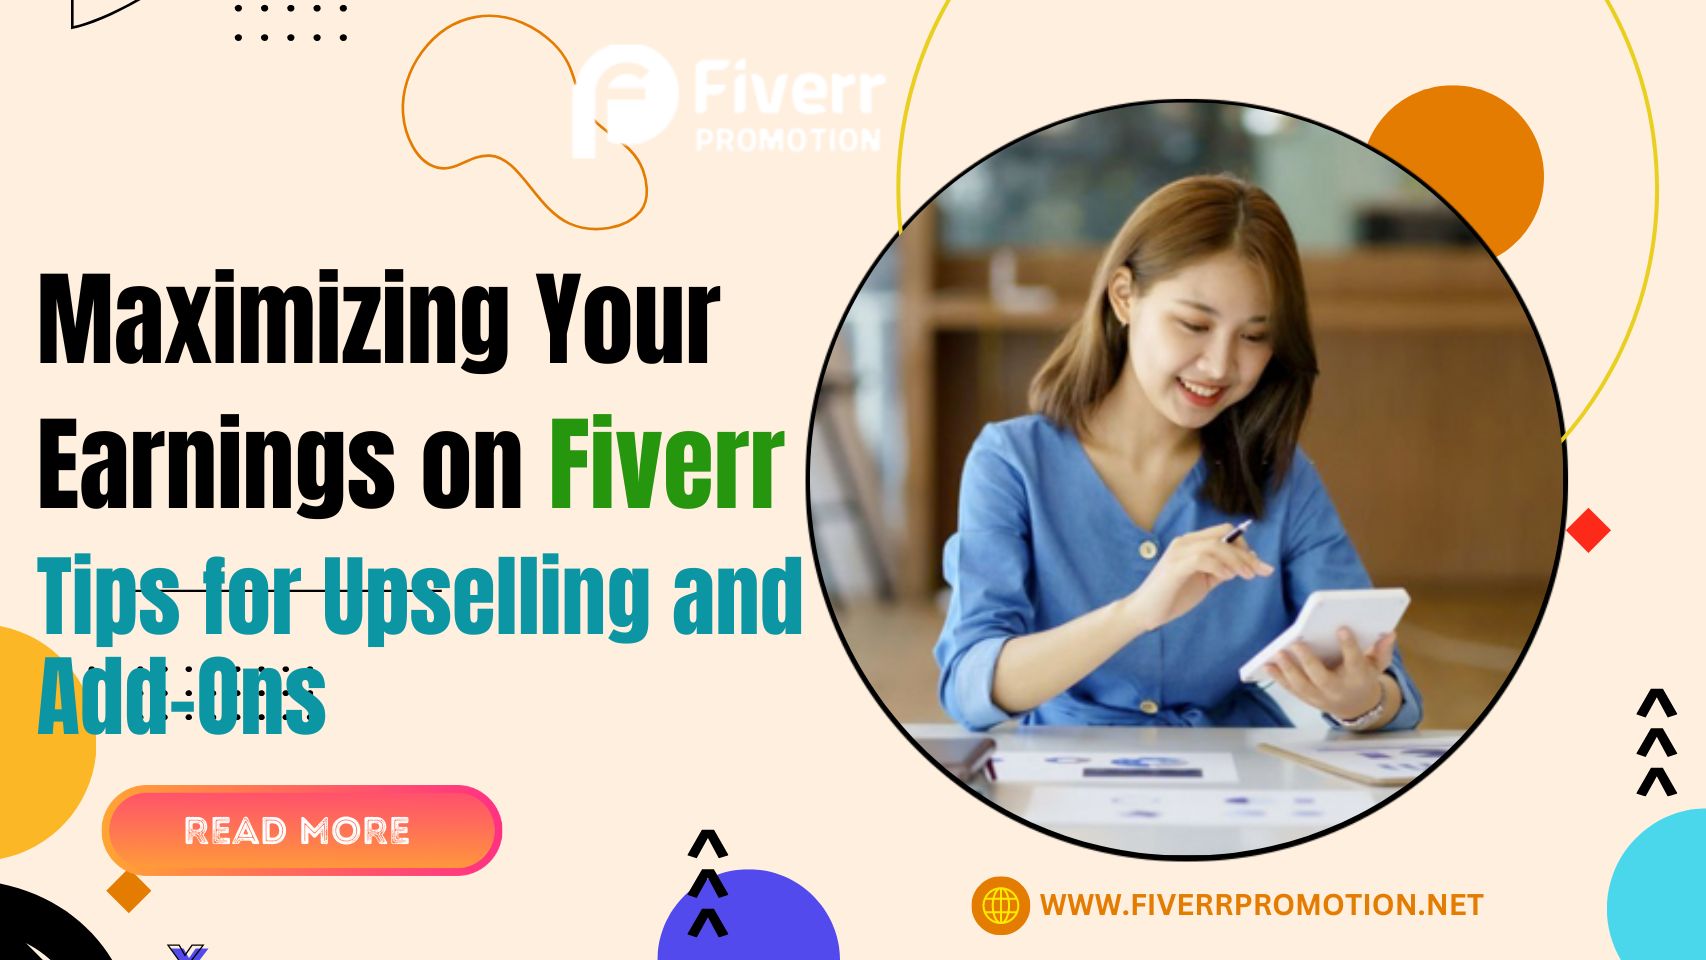 Maximizing Your Earnings on Fiverr: Tips for Upselling and Add-Ons